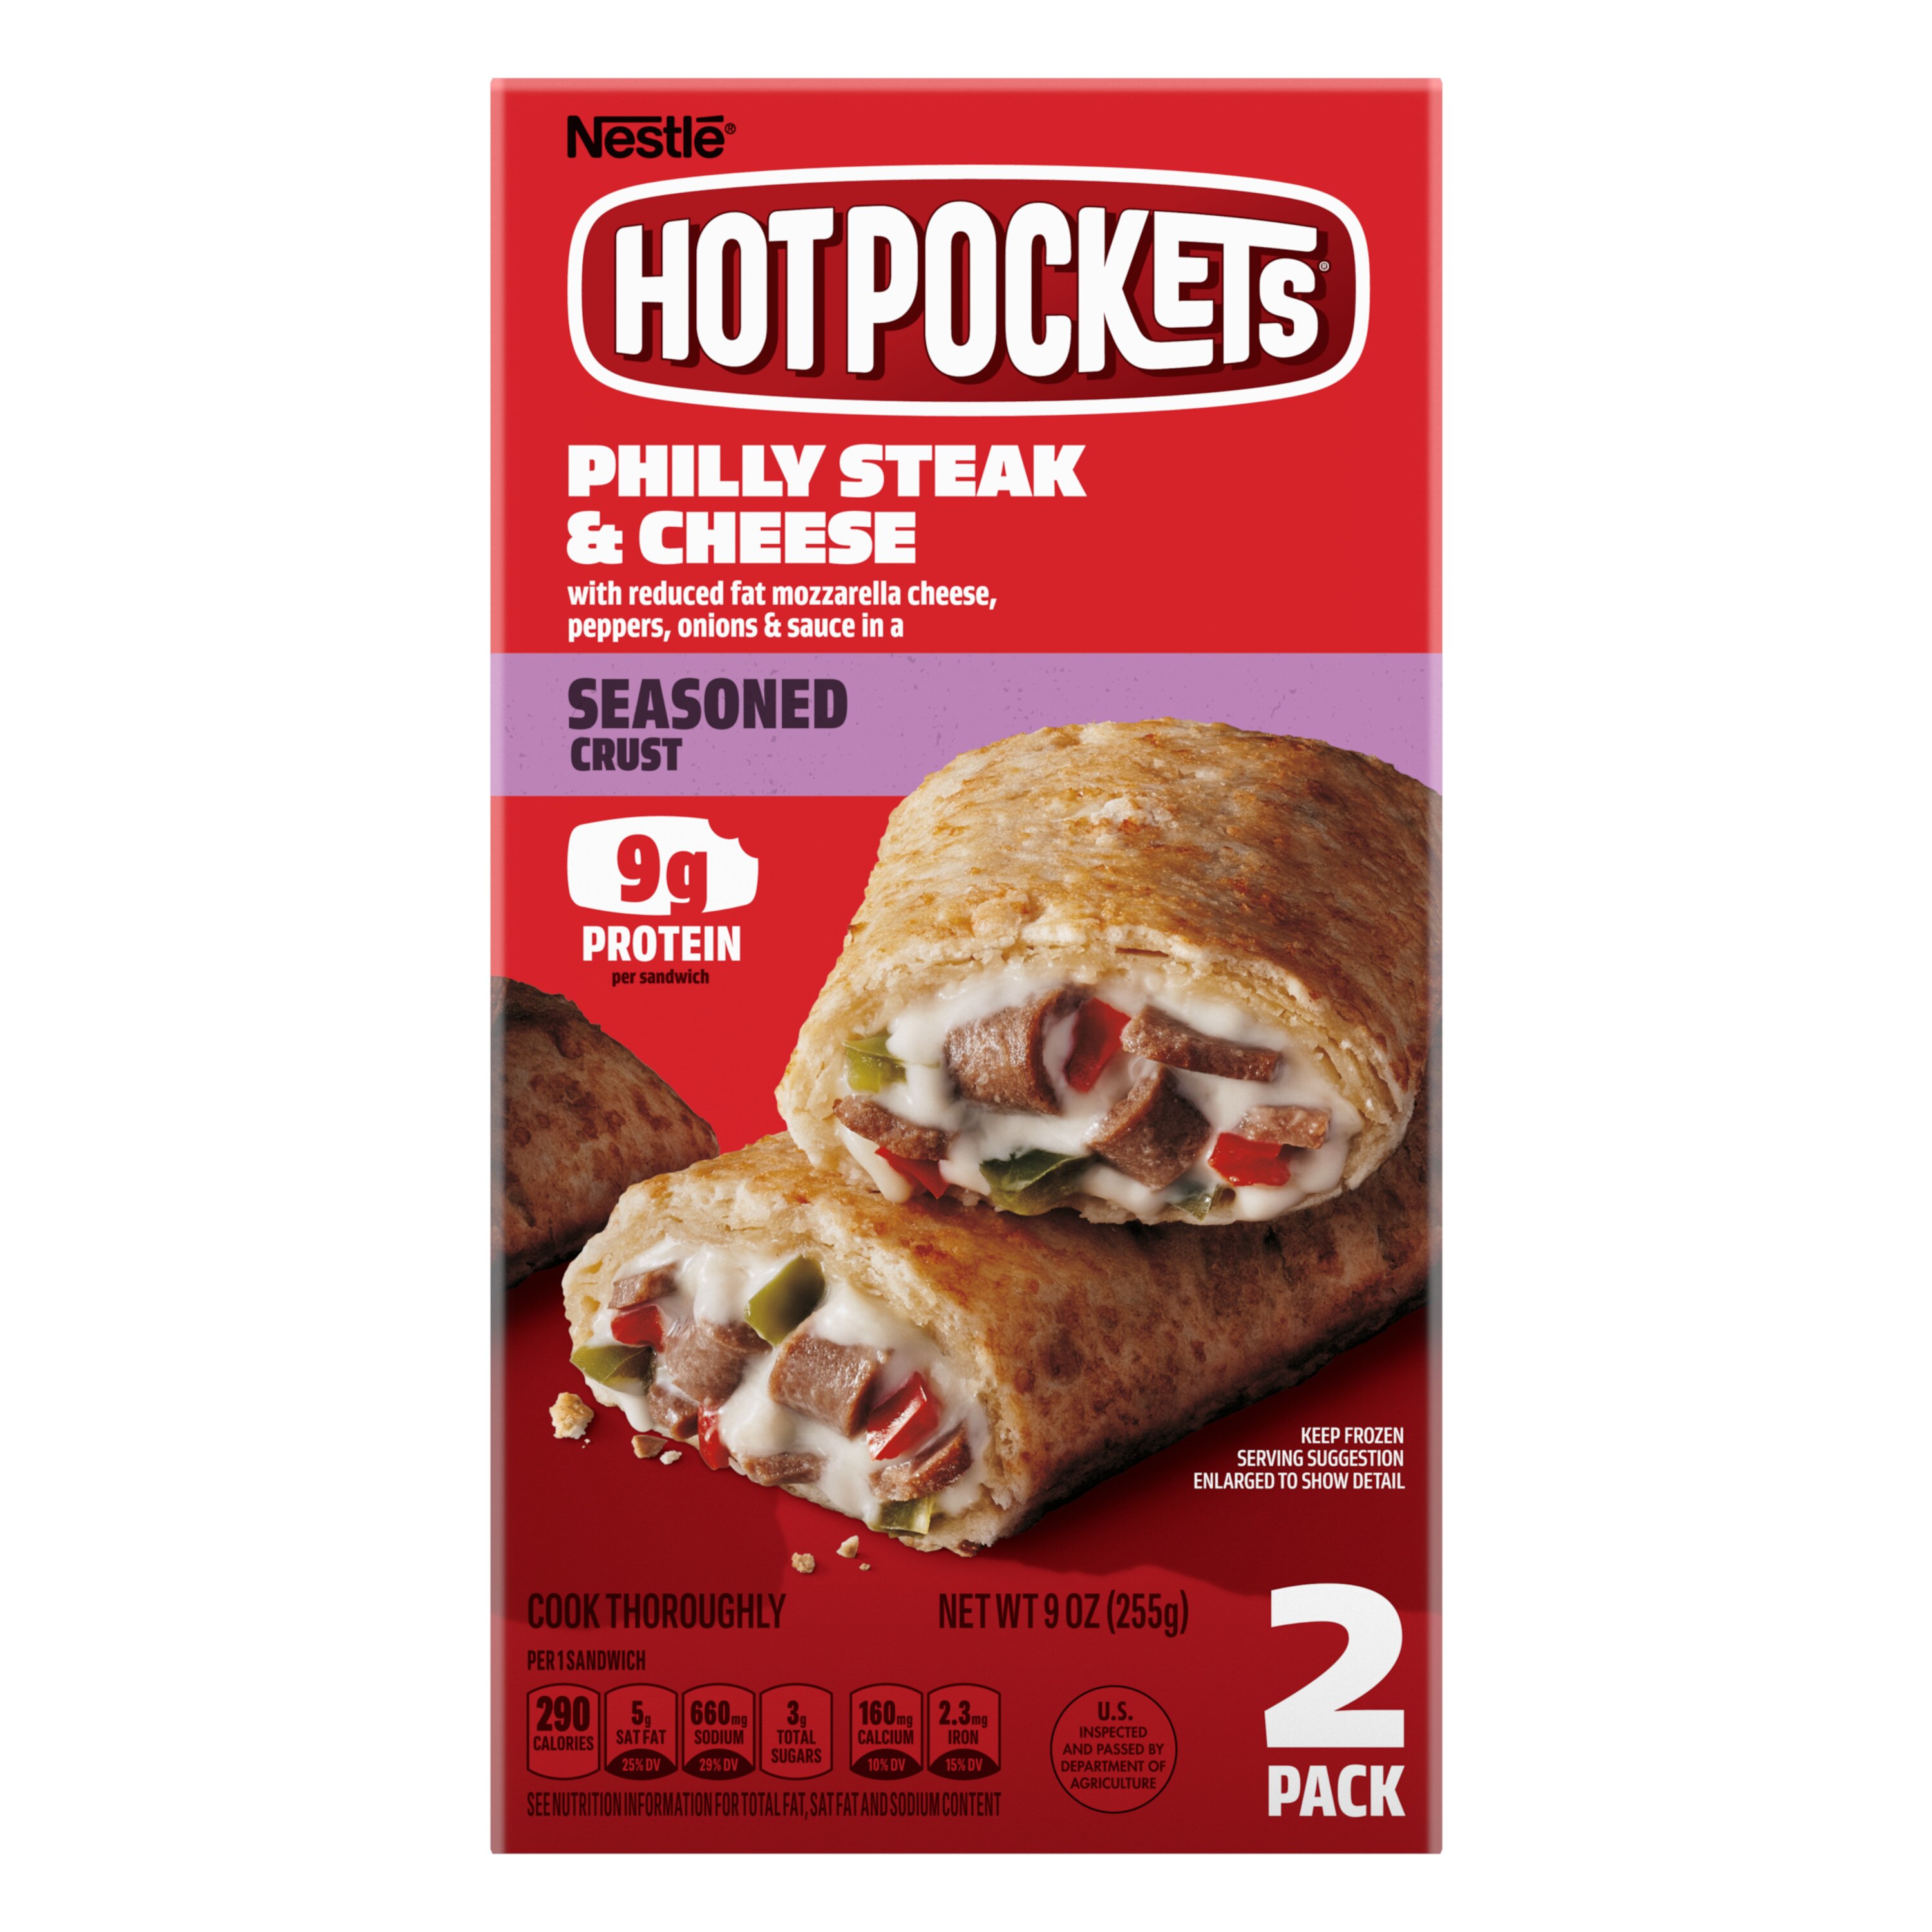 Hot Pockets Philly Steak and Cheese Frozen Sandwiches, 9oz, 2 Count